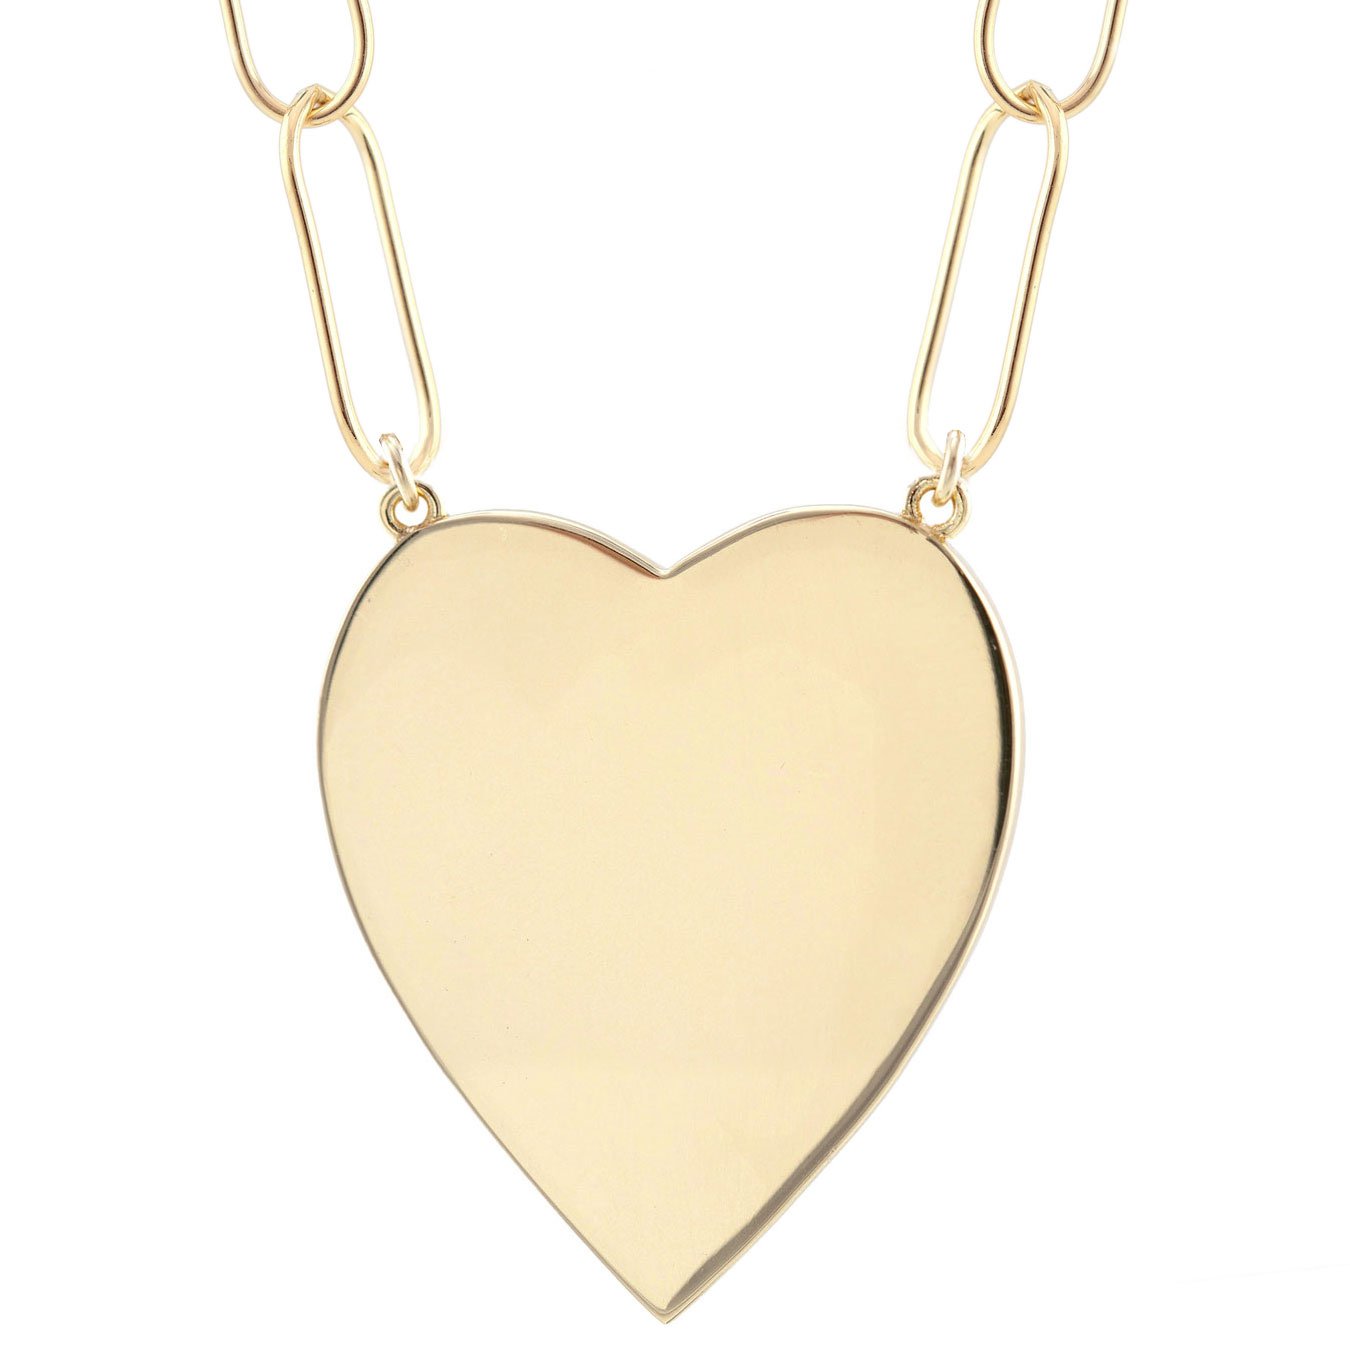 Women’s Large Heart Pendant On Large Link Chain Gold Filled Kris Nations